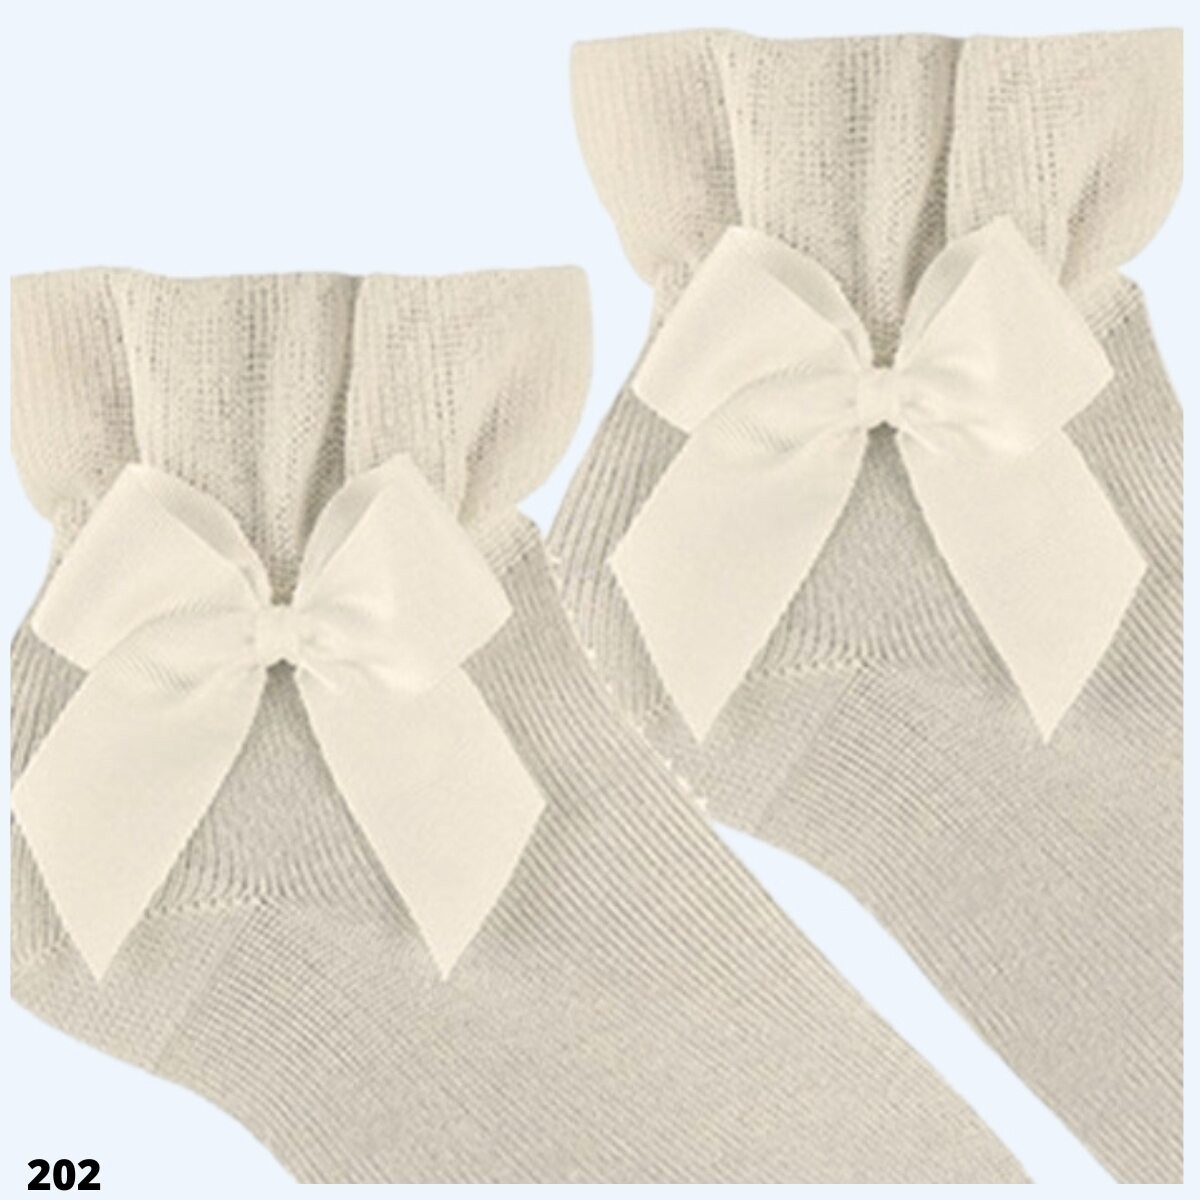 CEREMONY ANKLE SOCKSWITH GROSSGRAIN BOW CONDOR - 5